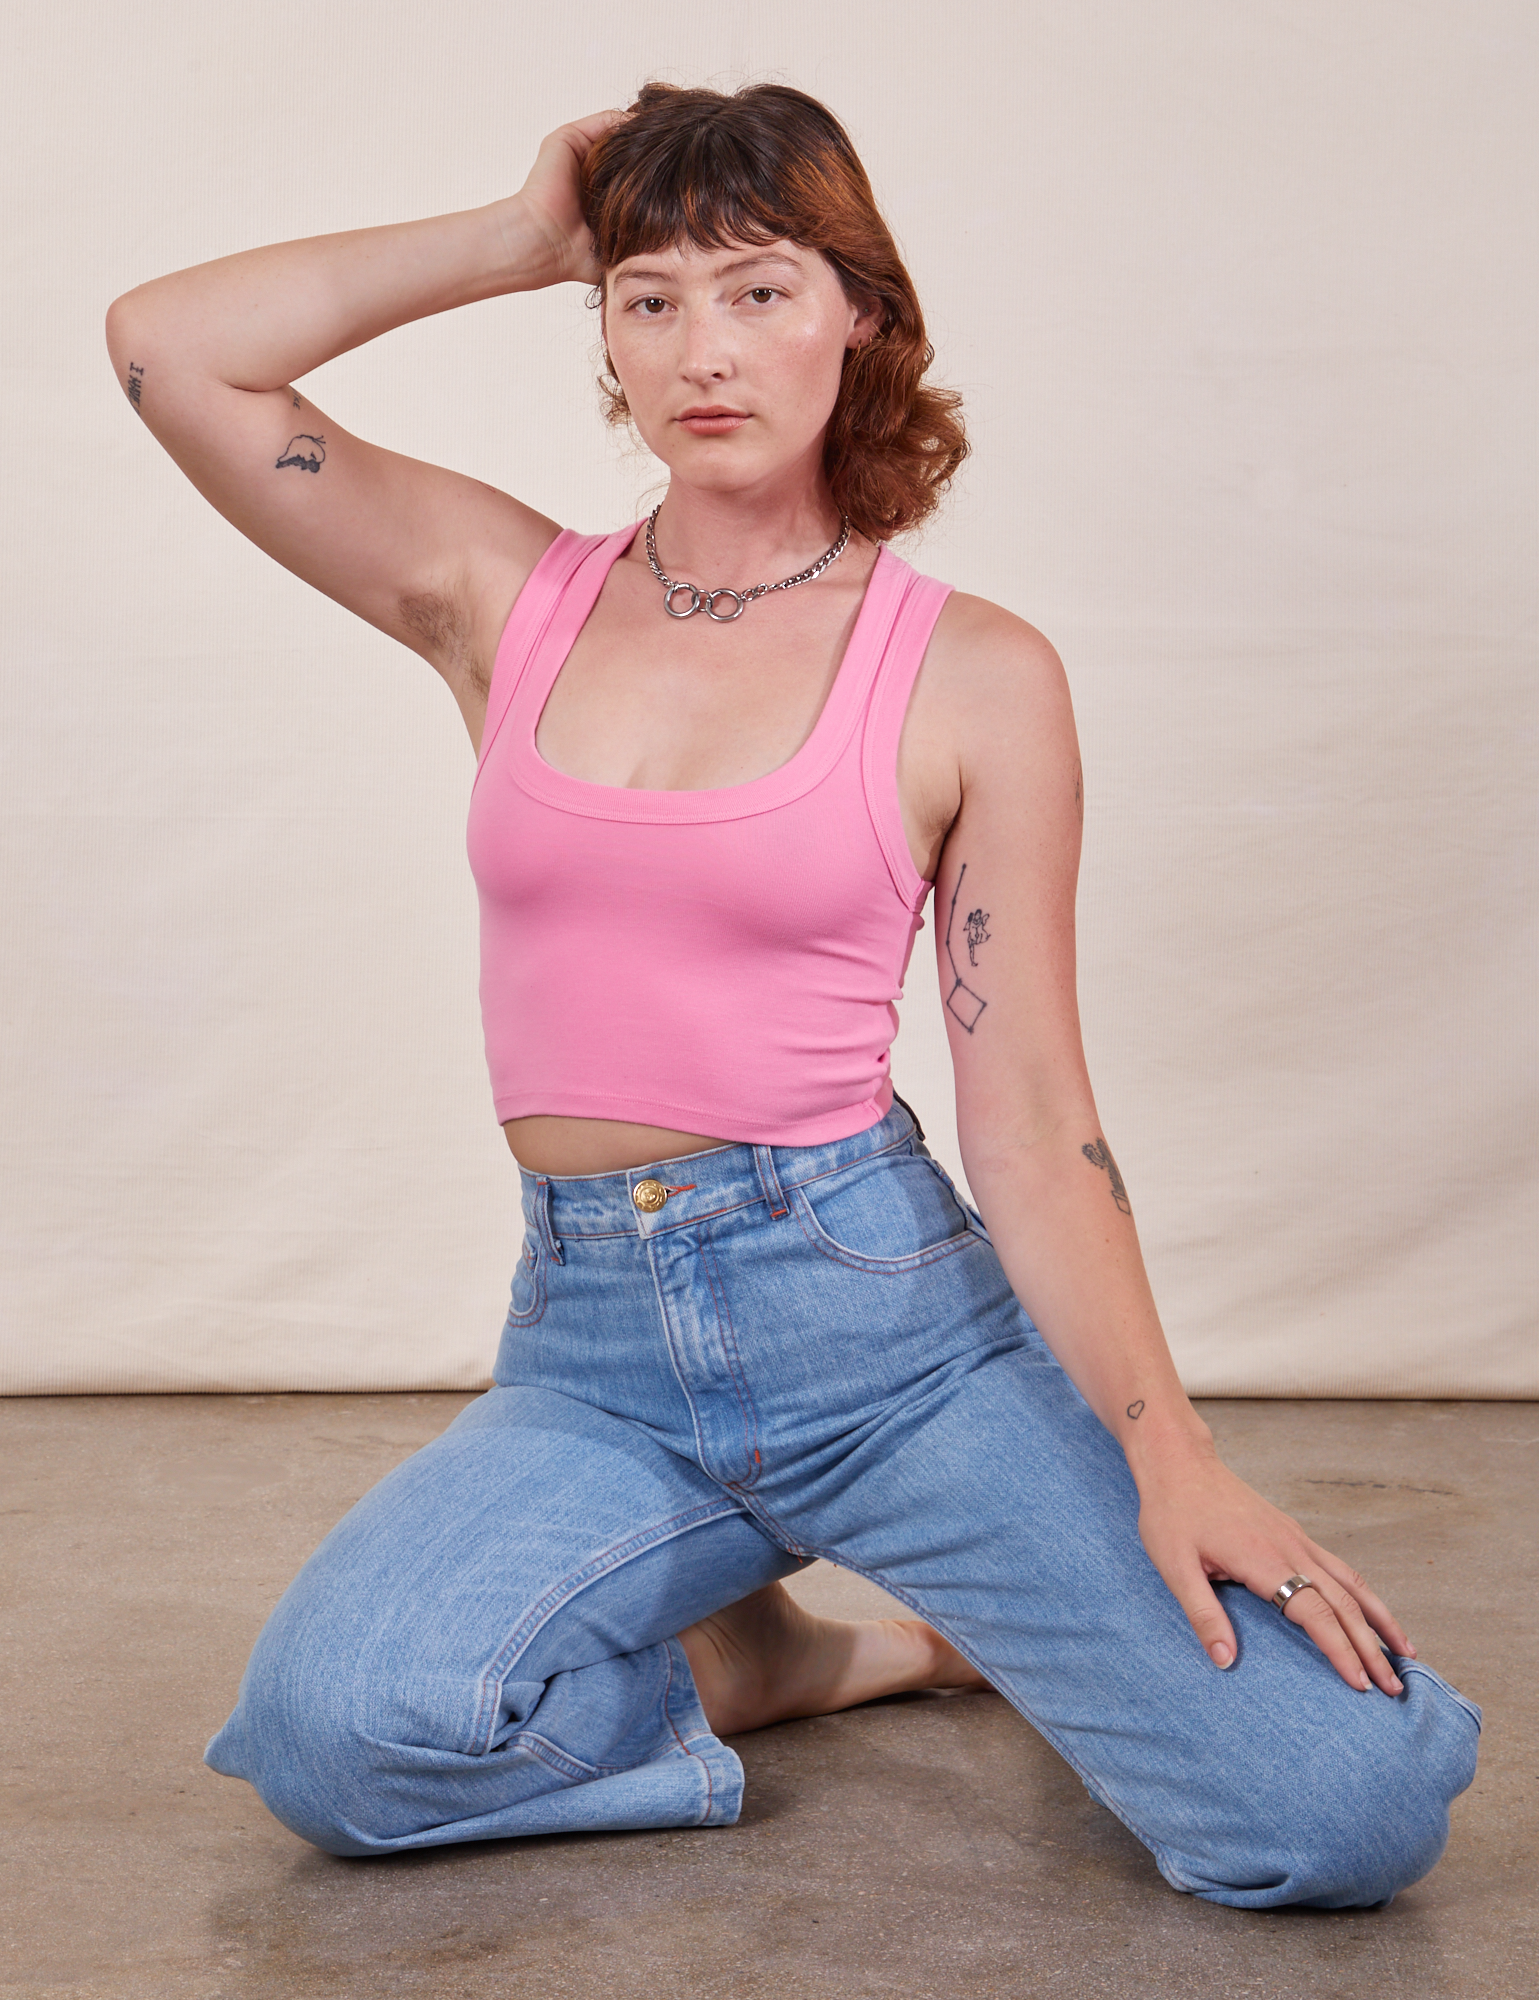 Alex is 5&#39;8&quot; and wearing P Cropped Tank Top in Bubblegum Pink paired with light wash Sailor Jeans